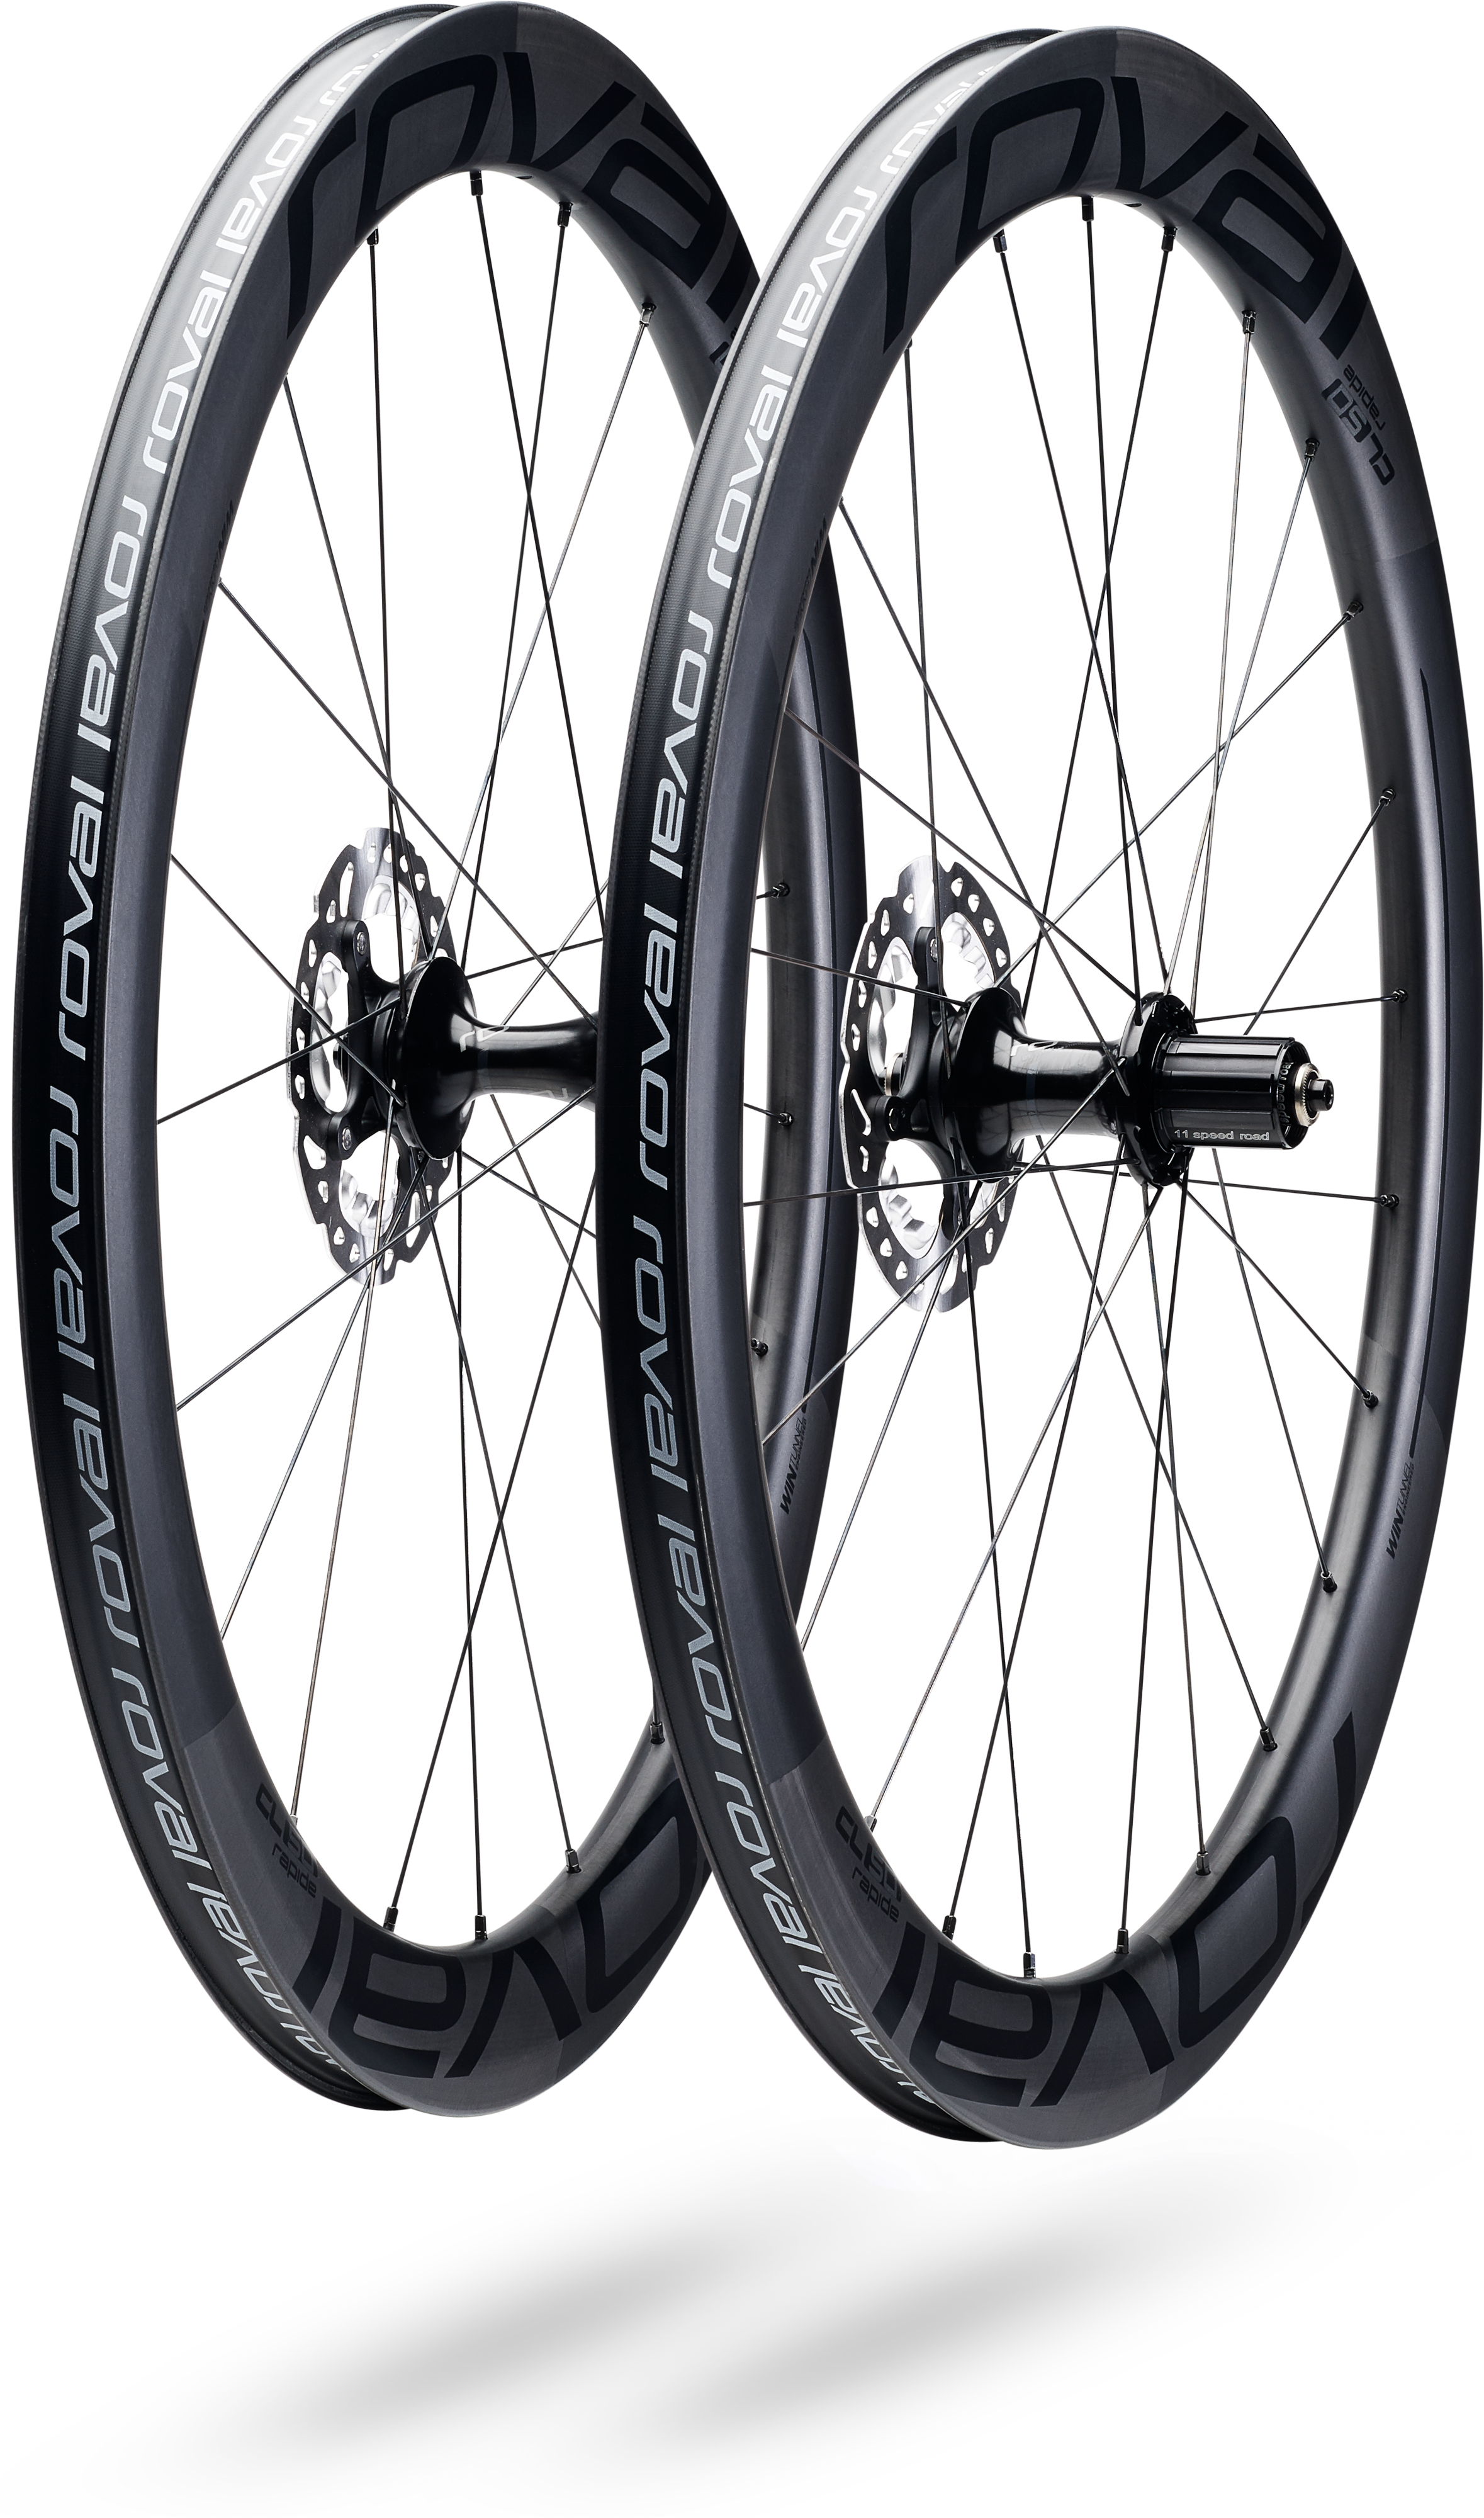 Roval CL 50 Disc Wheelset | Specialized.com